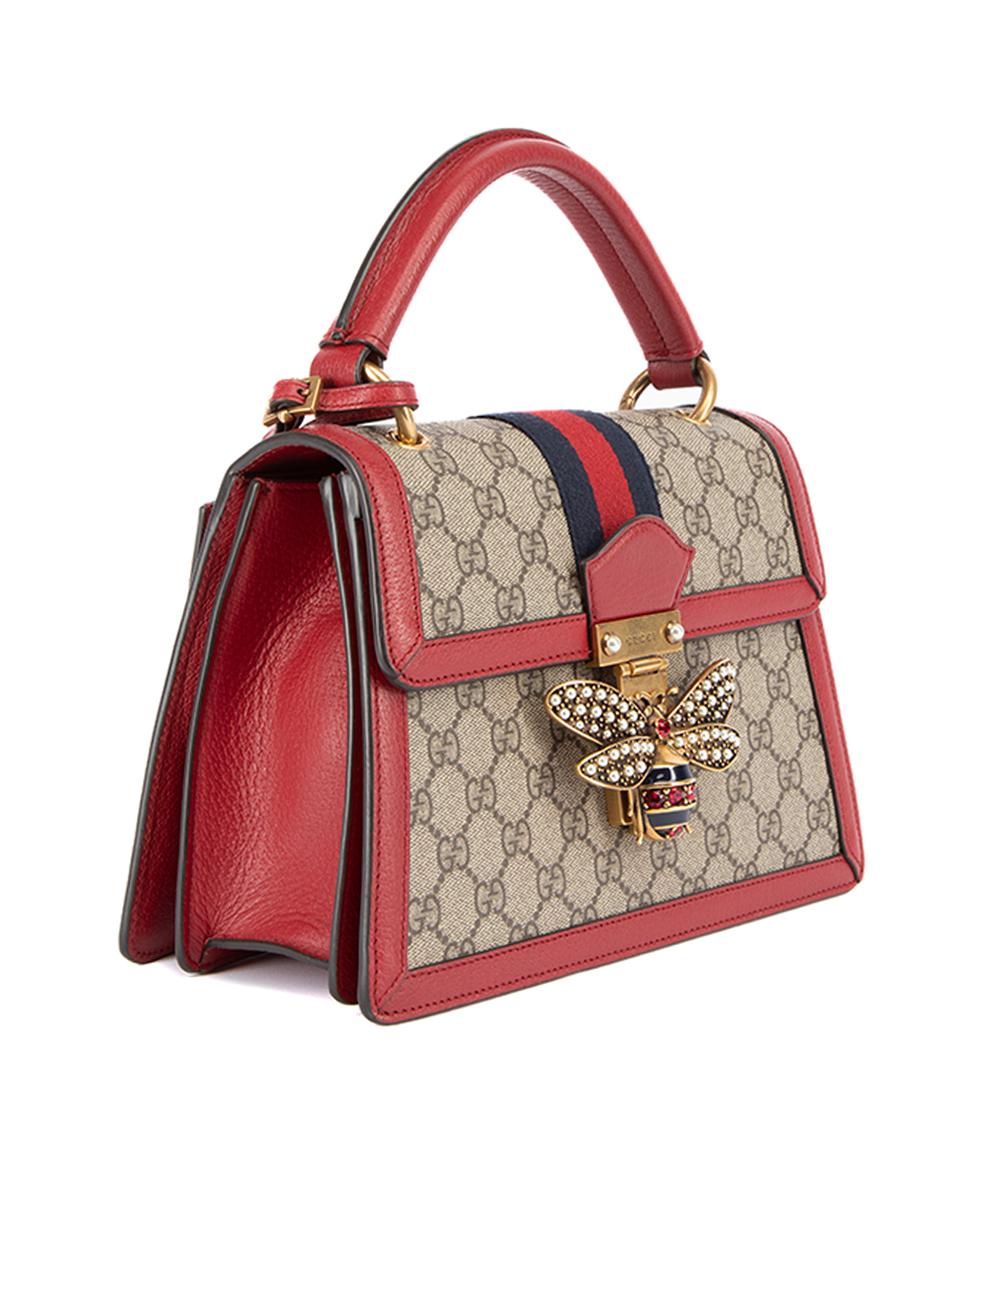 CONDITION is Very good. Minimal wear to bag is evident. Minimal wear to the gold hardware on this used Gucci designer resale item. Details Brown and red Canvas and leather Small top handle bag GG supreme pattern 1x Red leather top handle 1x